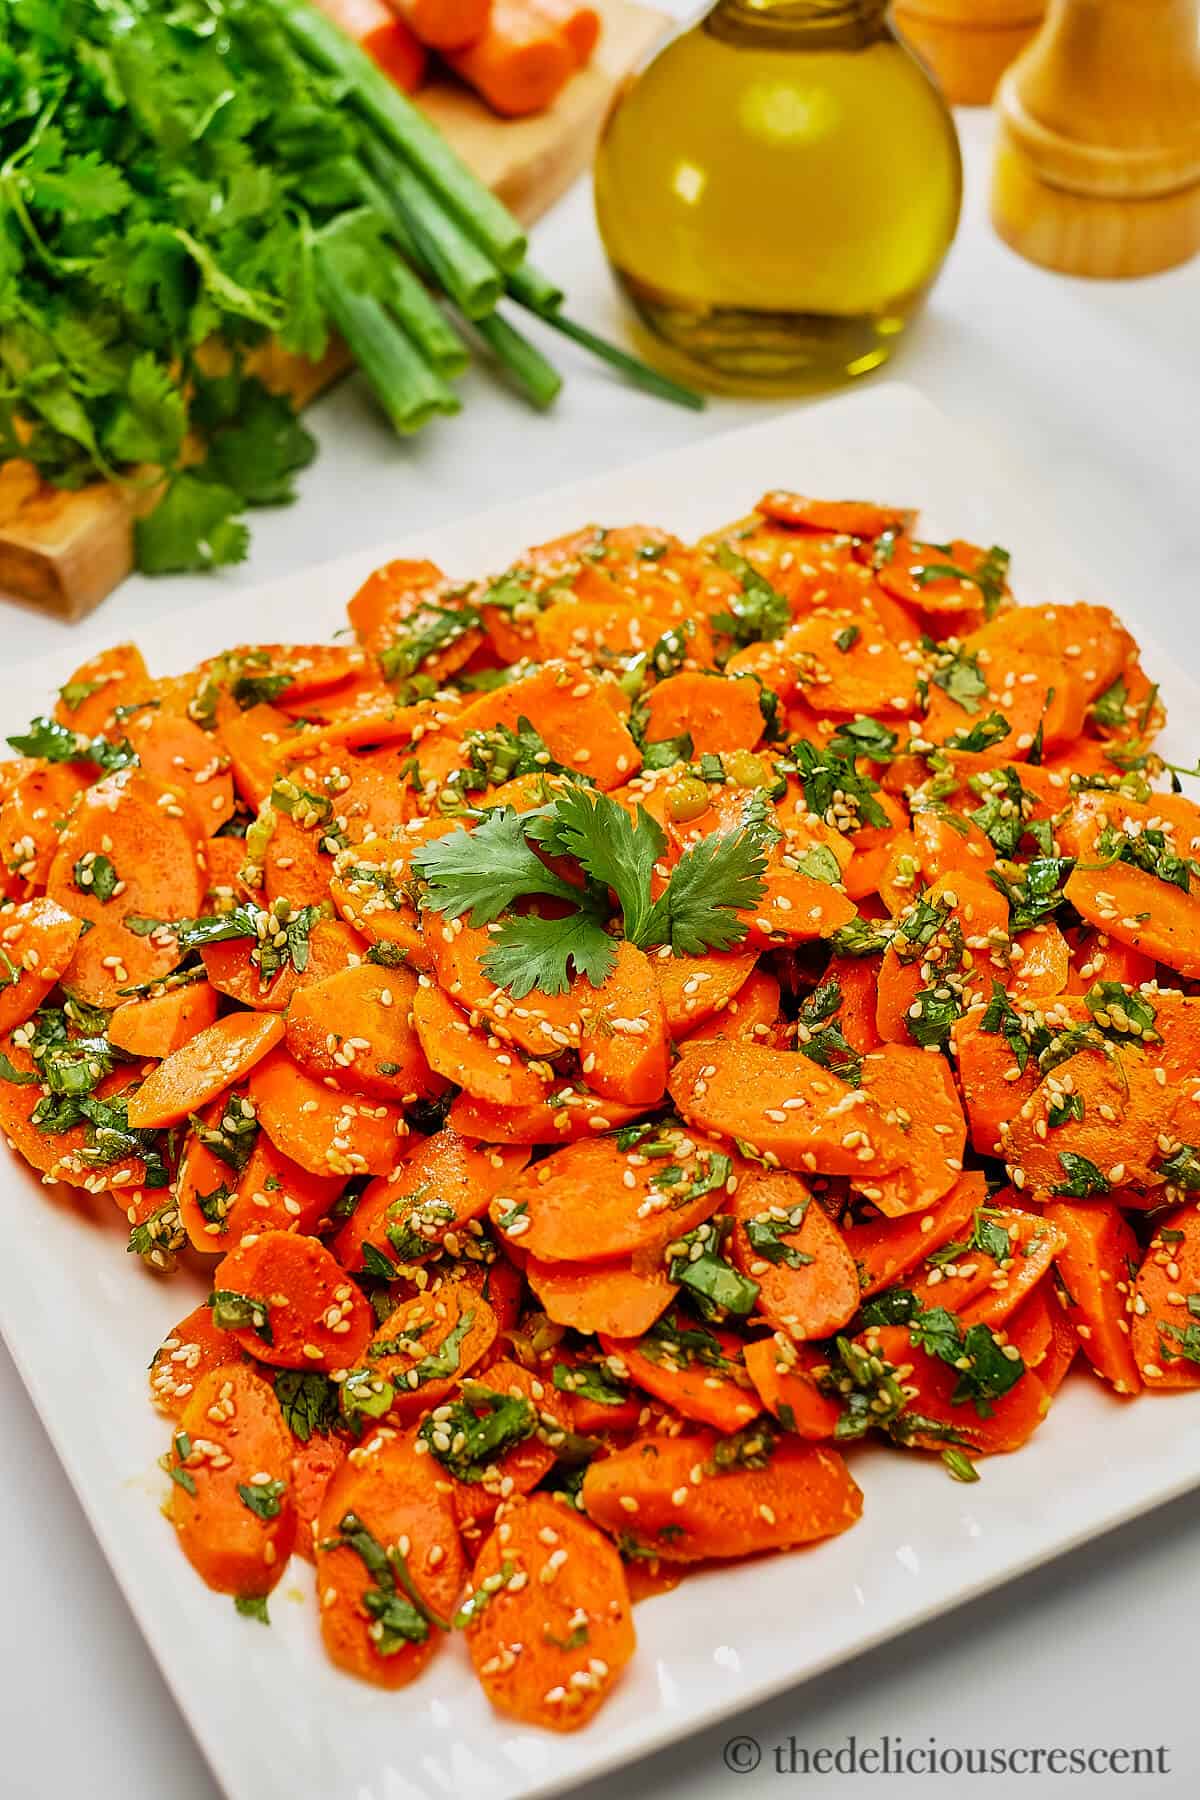 Moroccan carrot salad served in a white plate.